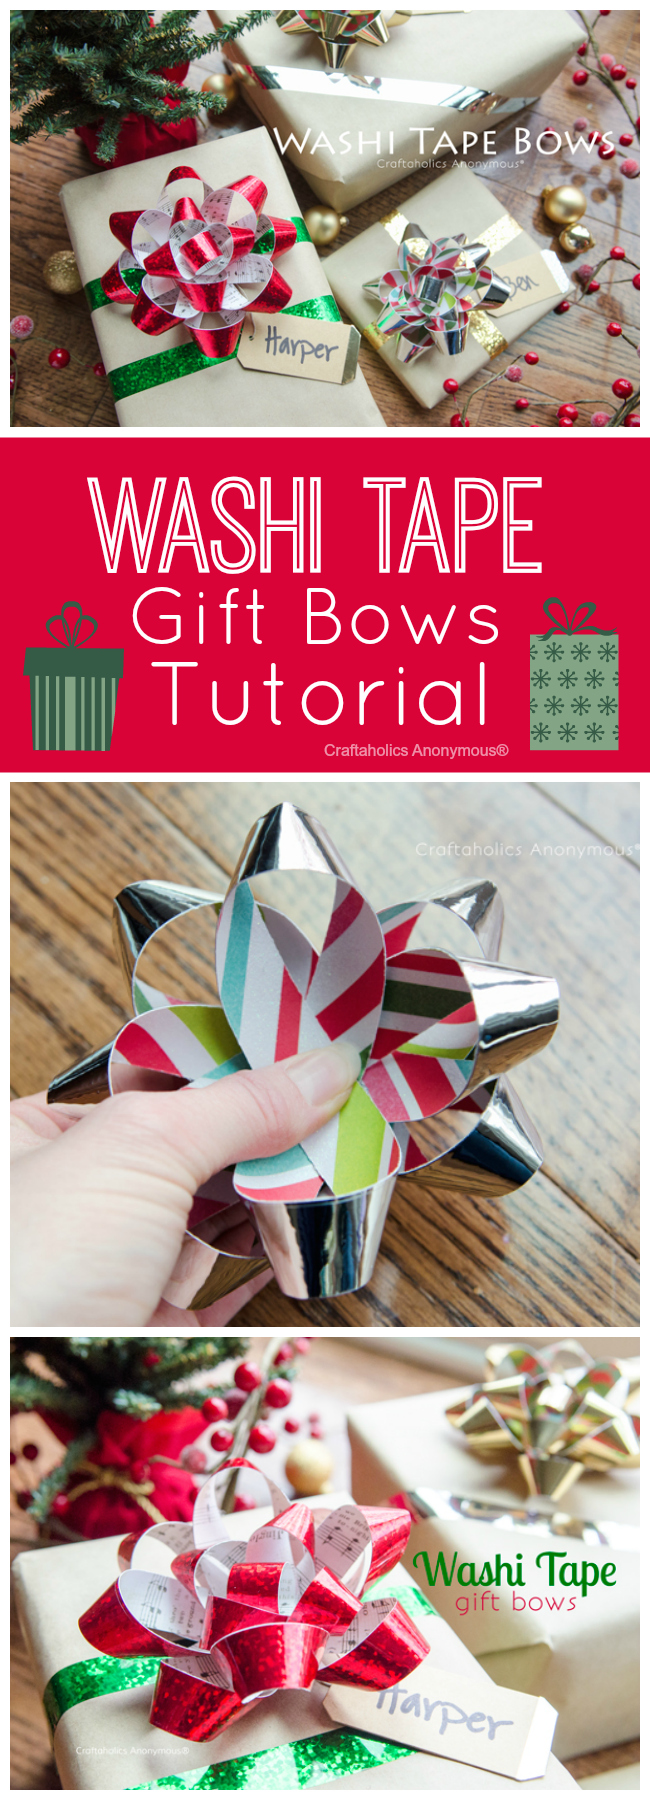 Washi Tape Gift Bows Tutorial. Make handmade Christmas bows using washi tape and paper. Personalize the bow to the giftee using paper that they like. Ex: if they like music, just sheet music paper.